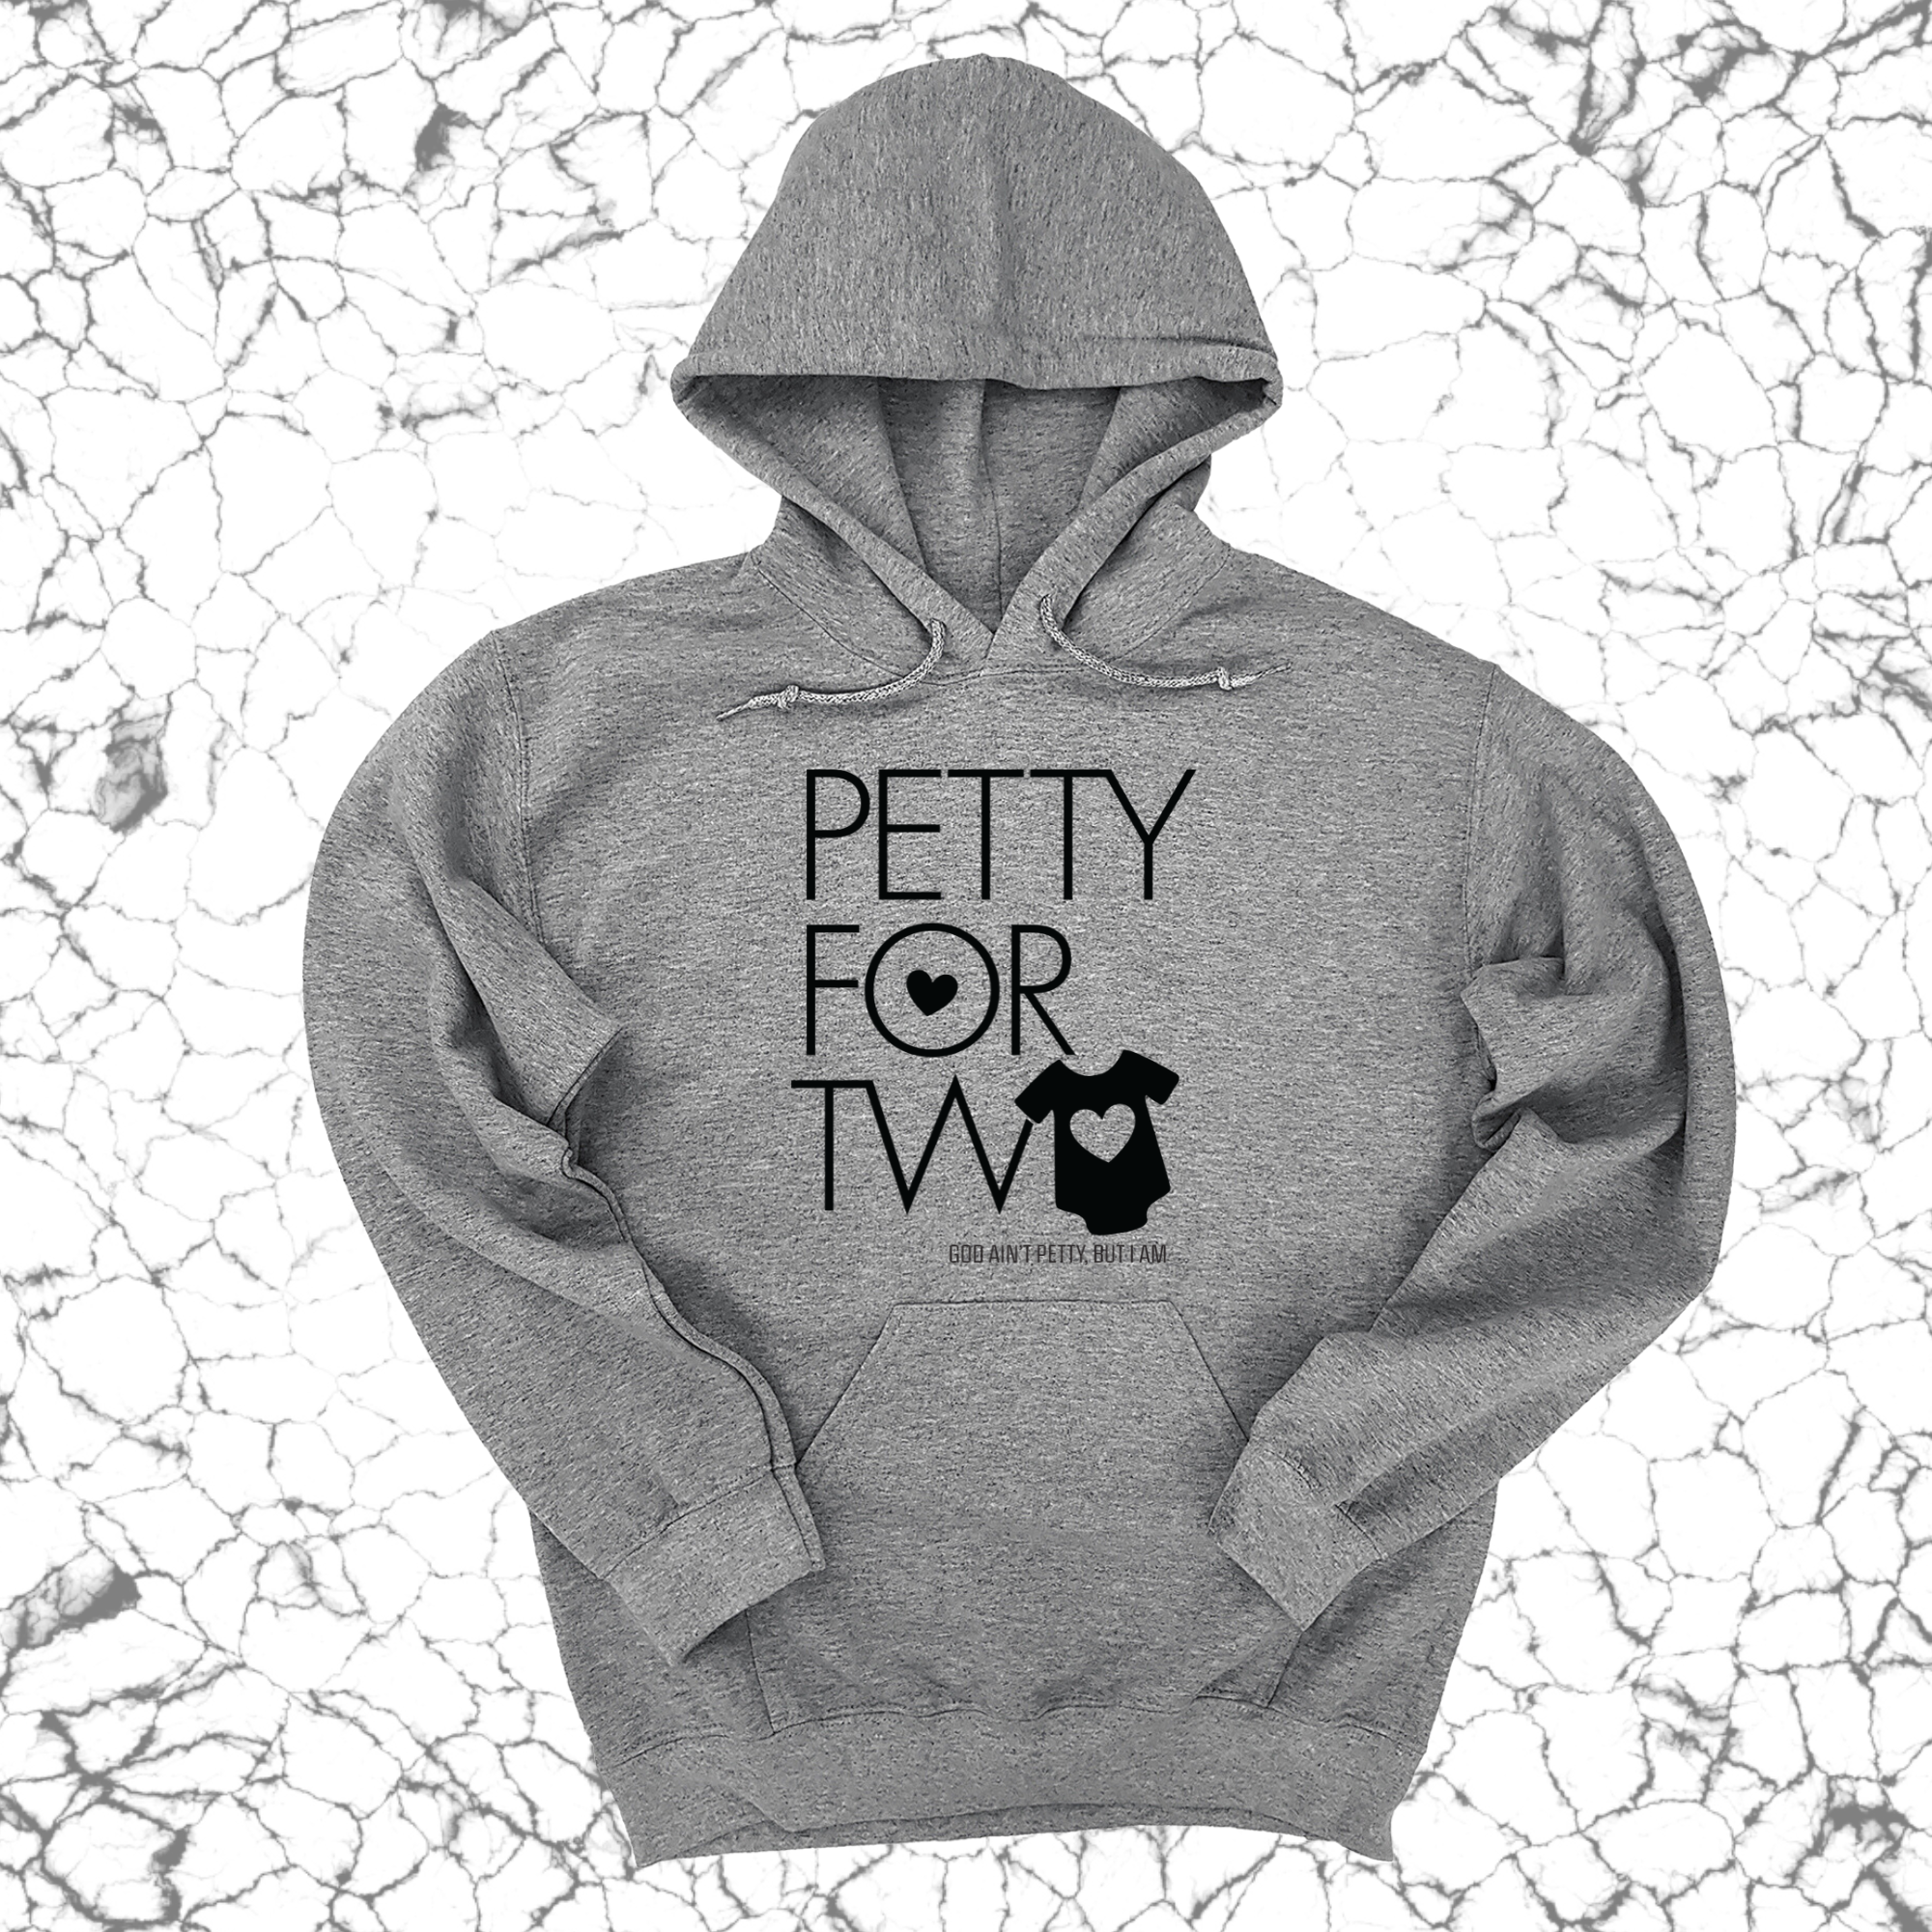 Petty for Two Unisex Hoodie-Hoodie-The Original God Ain't Petty But I Am